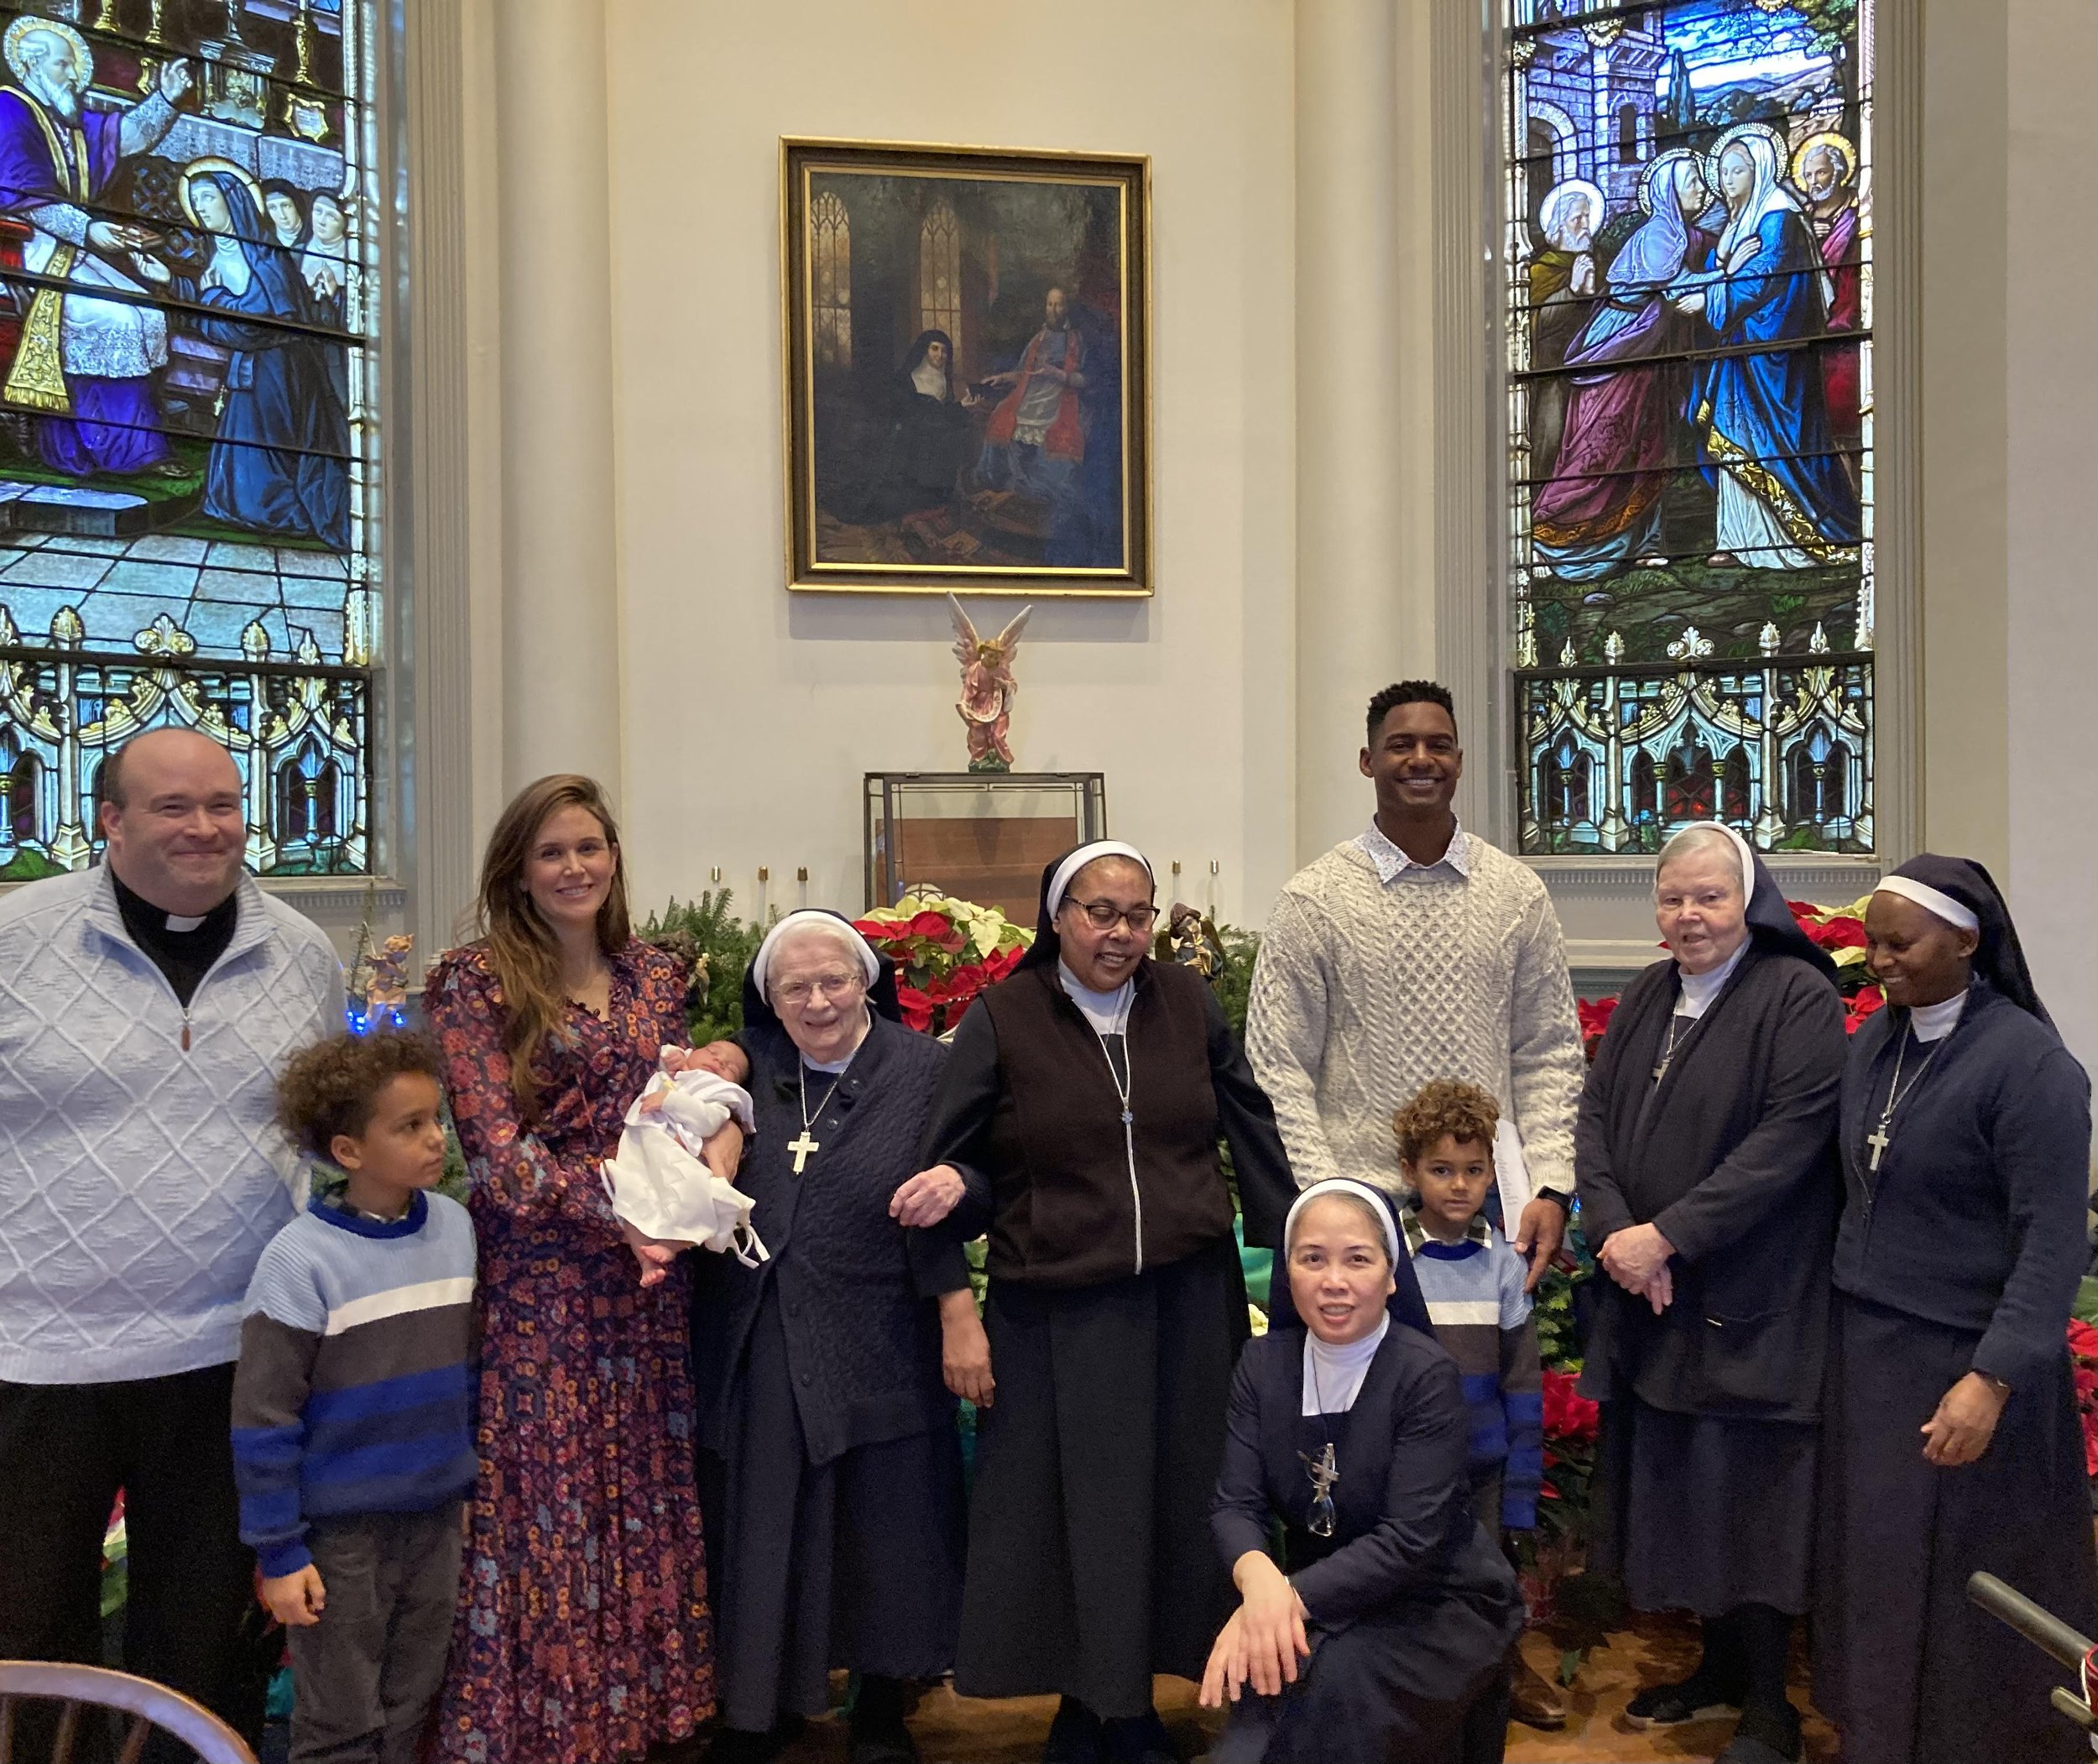  Father Michael Vannicola, OSFS, celebrated Mass with the Visitation Sisters at Georgetown Visitation and baptized Cillian Rose, the daughter of one of his former students.  